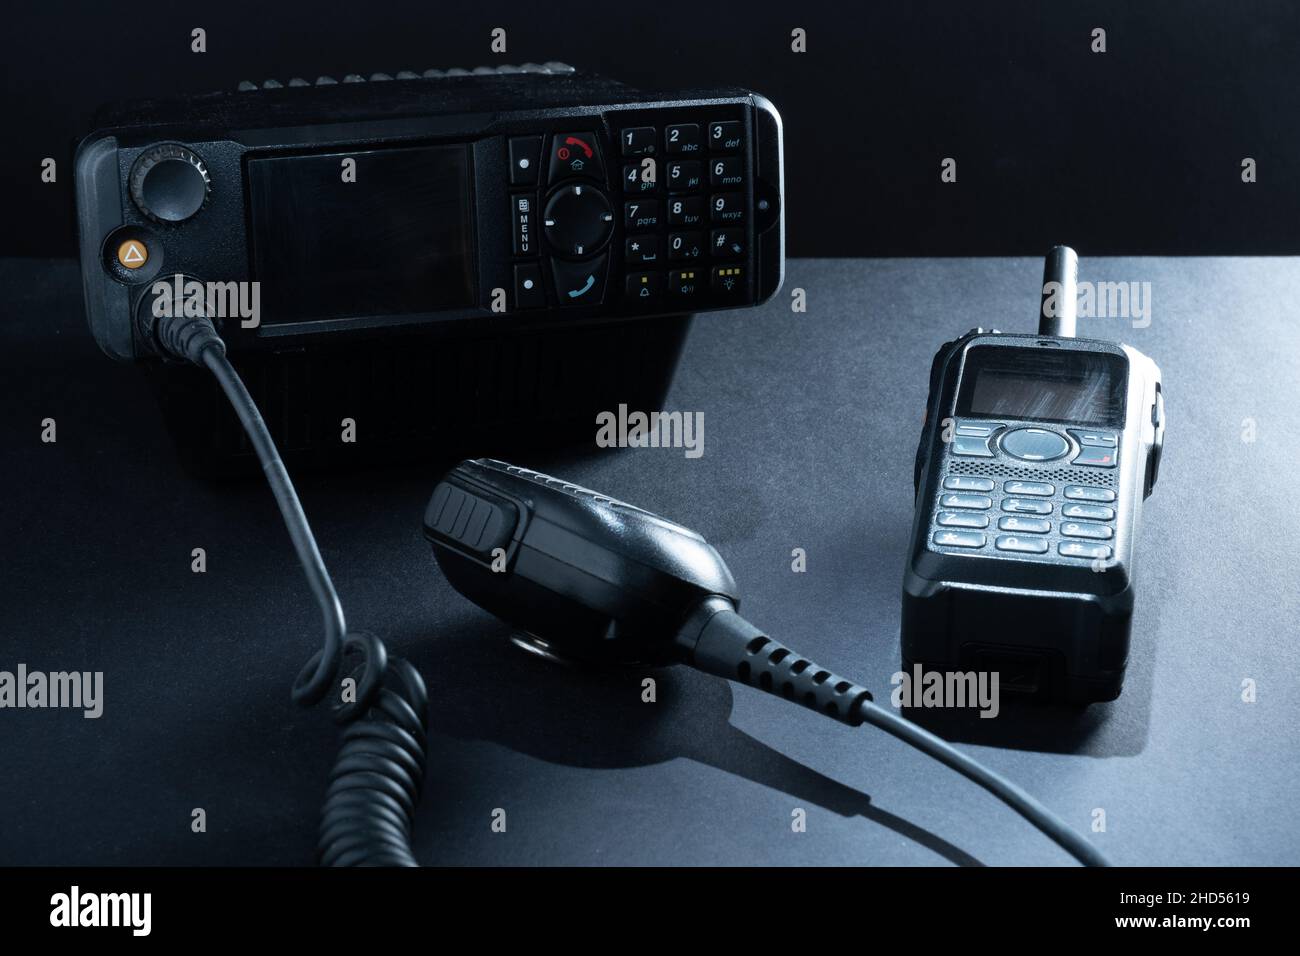 Helsinki / Finland - JANUARY 3, 2022: Closeup of pair of mobile two-way radios for Amateur radio operators against a dark background. Stock Photo